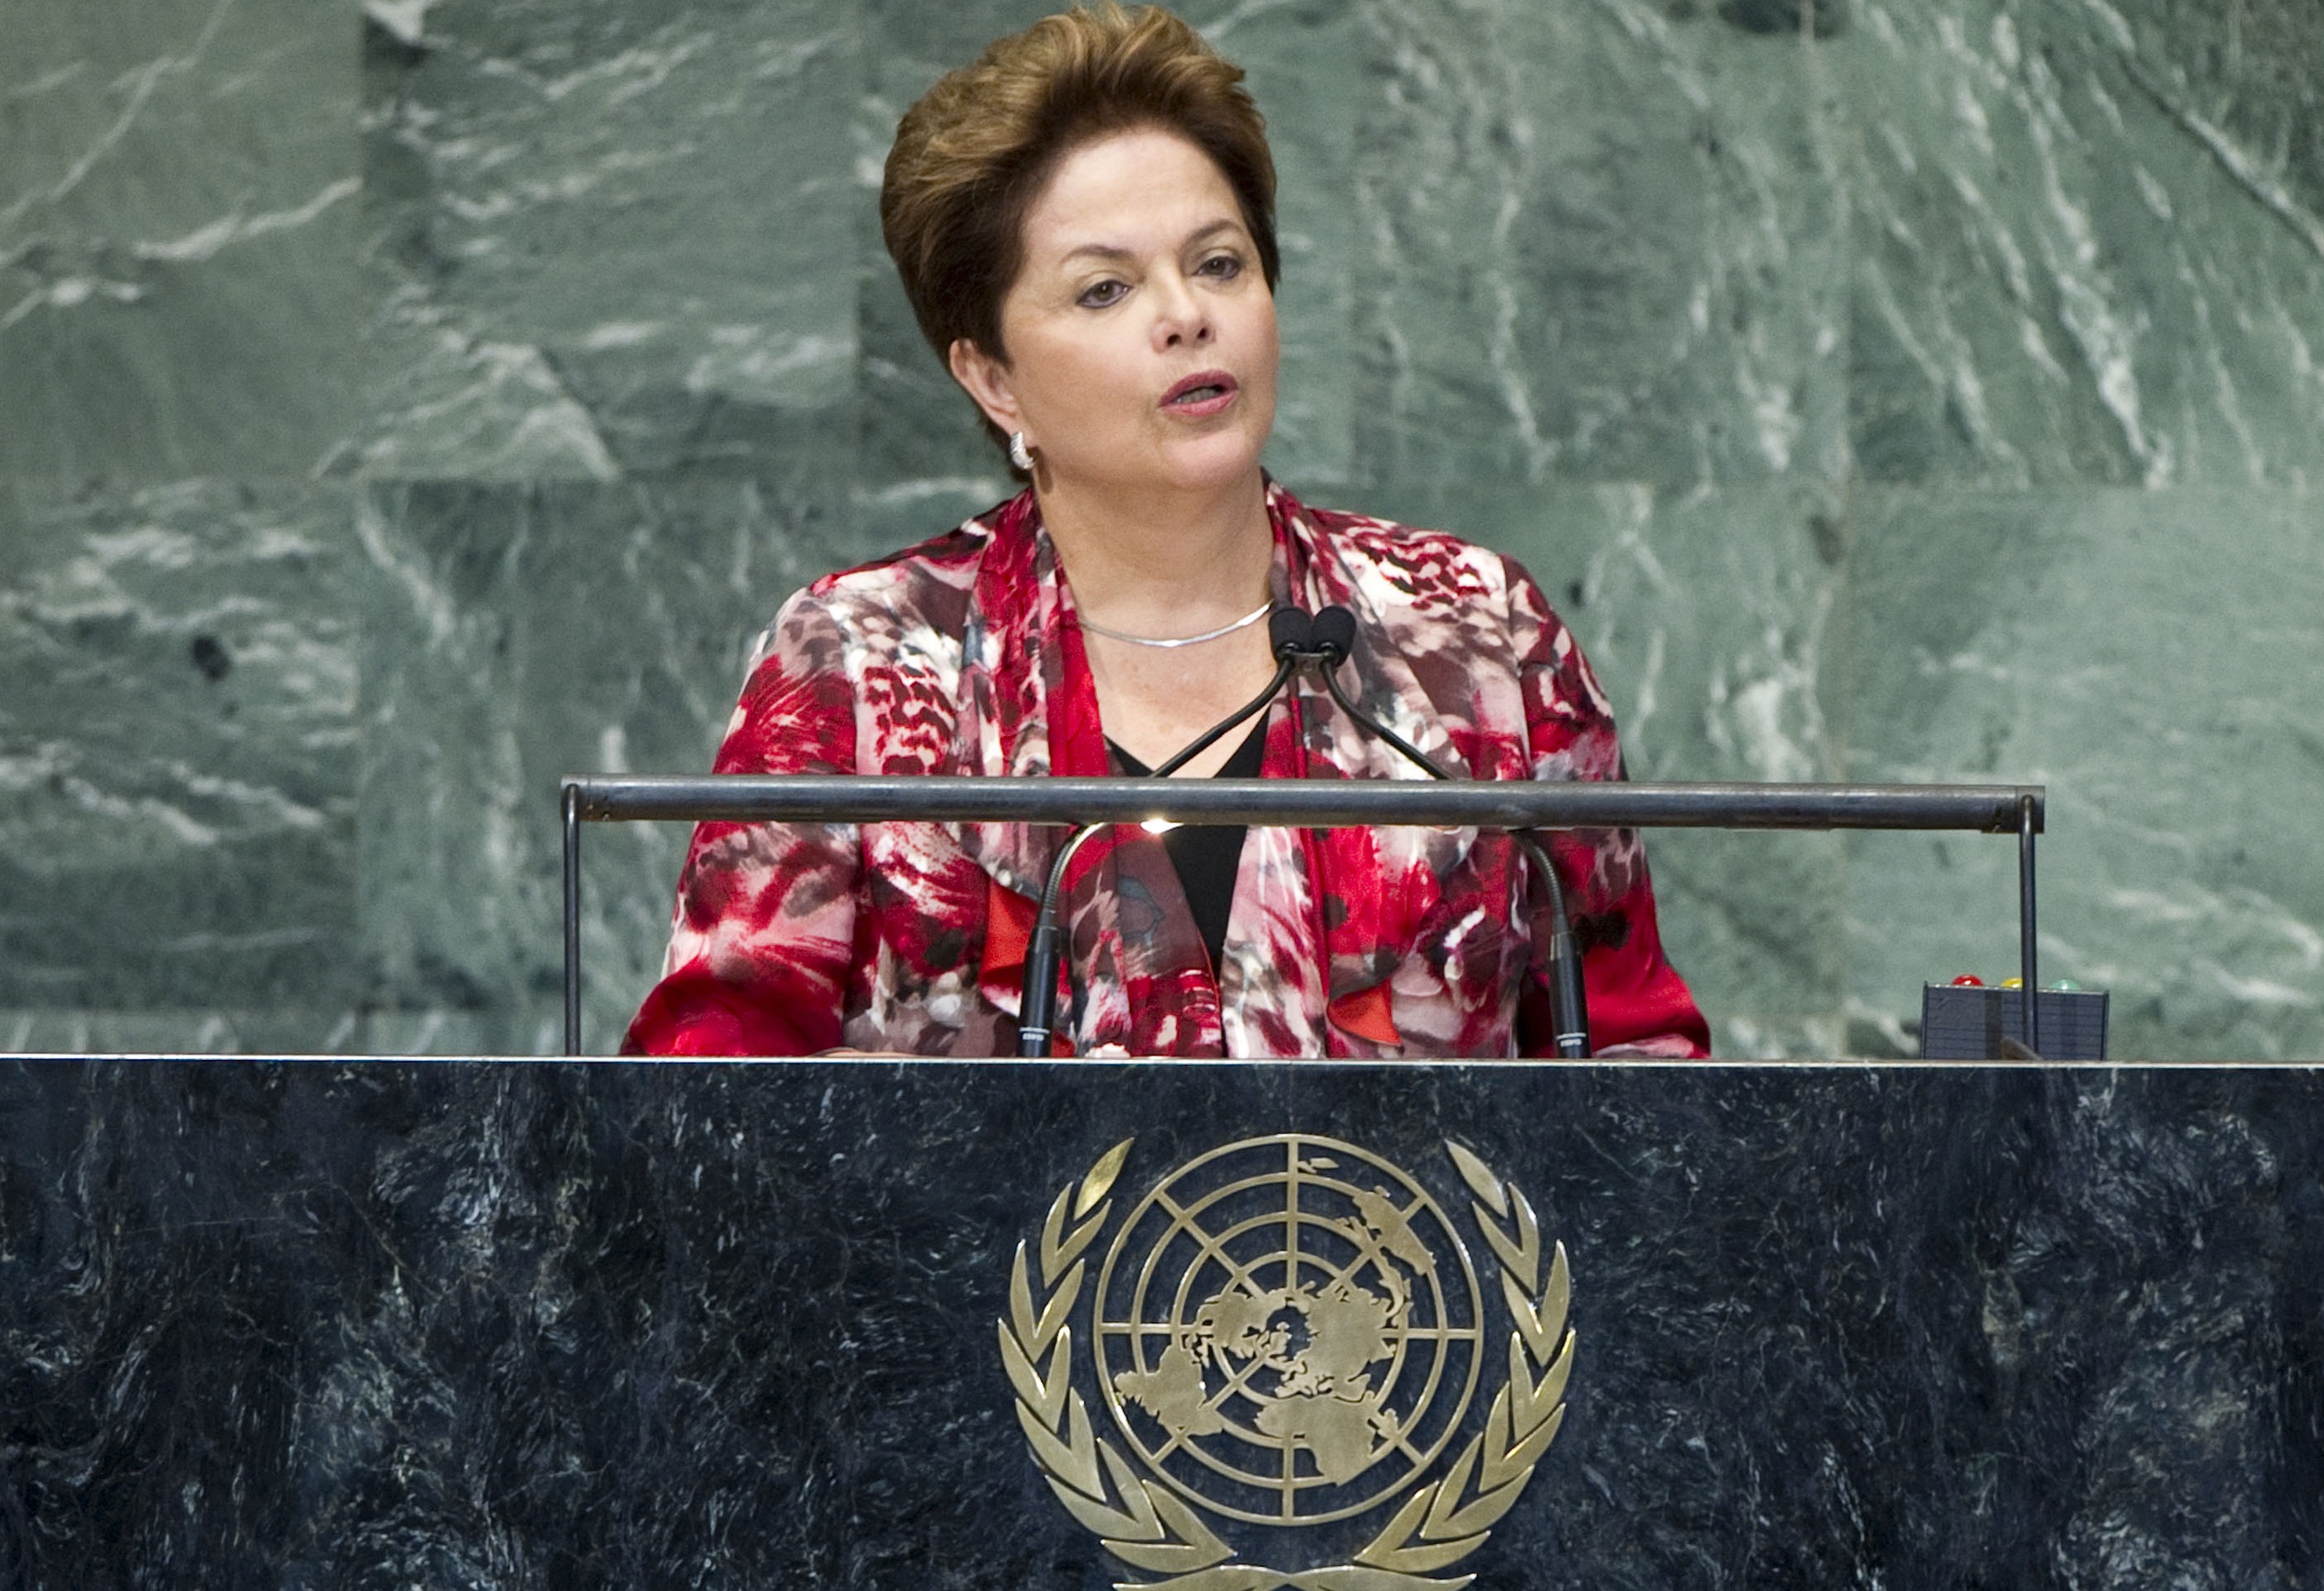 H.E. Ms. Dilma Vana Rousseff, President of Brazil addresses the general debate of the sixty-seventh session of the General Assembly.